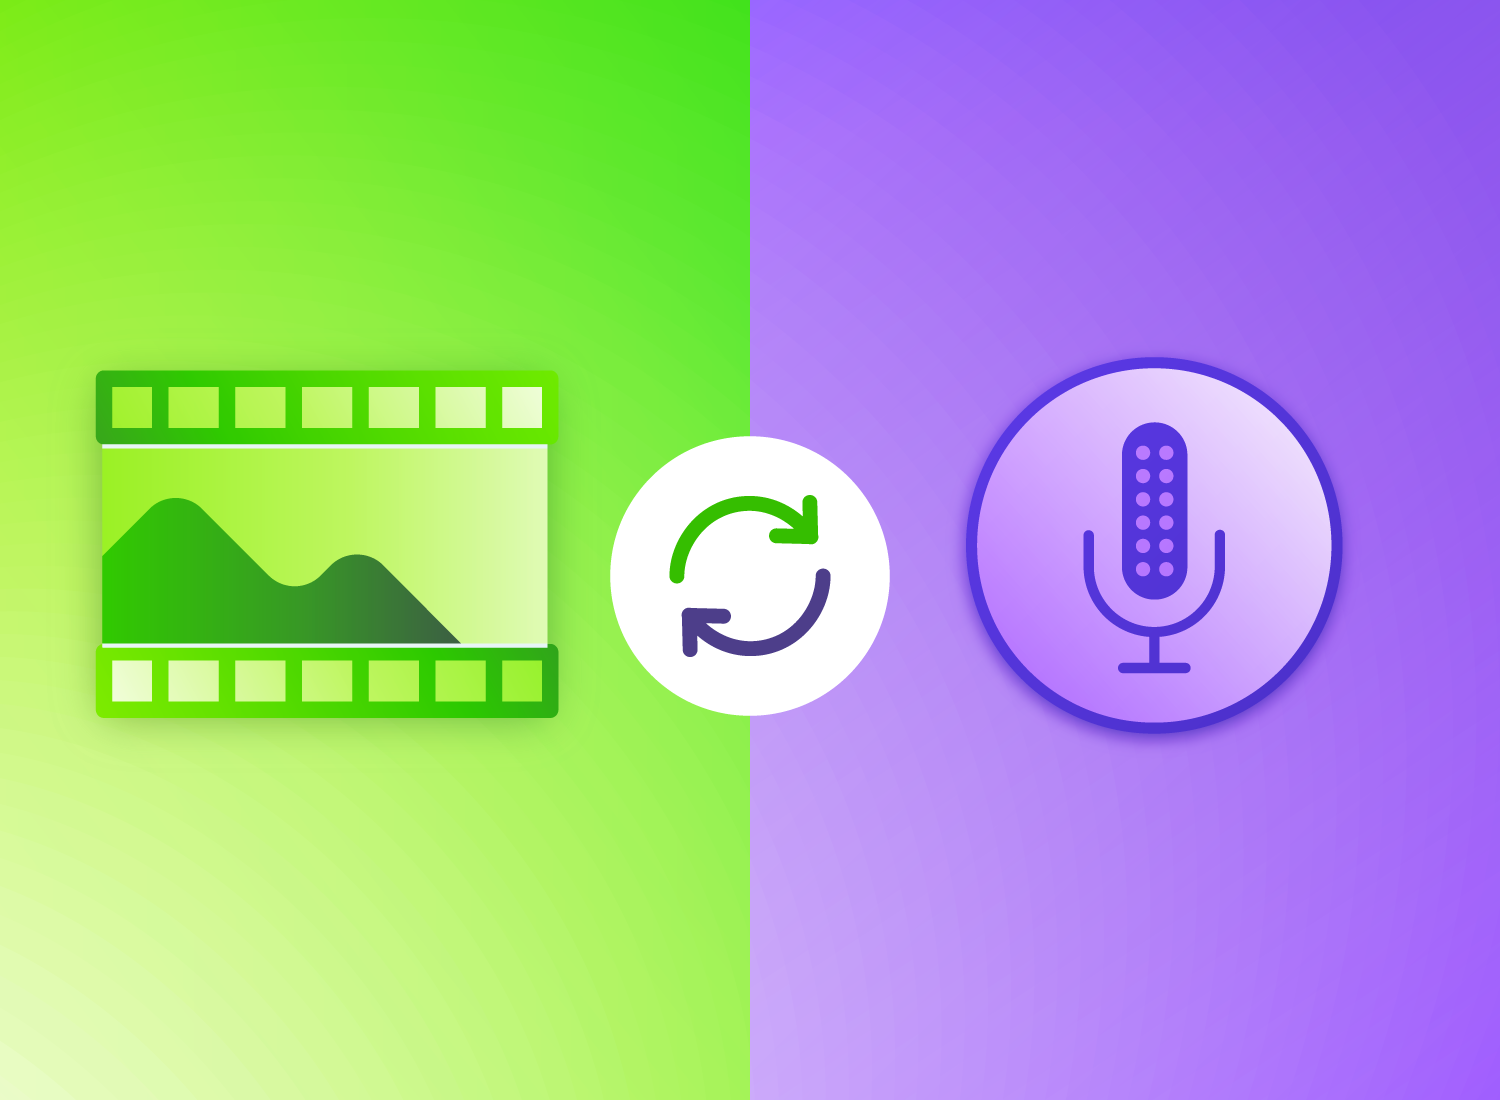 This image is a visual related to synchronizing audio and video sources in multimedia editing. On the left, there's a vibrant green background with a film strip icon, suggesting the video component of editing. To the right, the background shifts to purple, with a microphone icon inside a circle, representing the audio aspect. In the center, a circular arrow icon bridges the two halves, symbolizing the process of syncing audio with video.